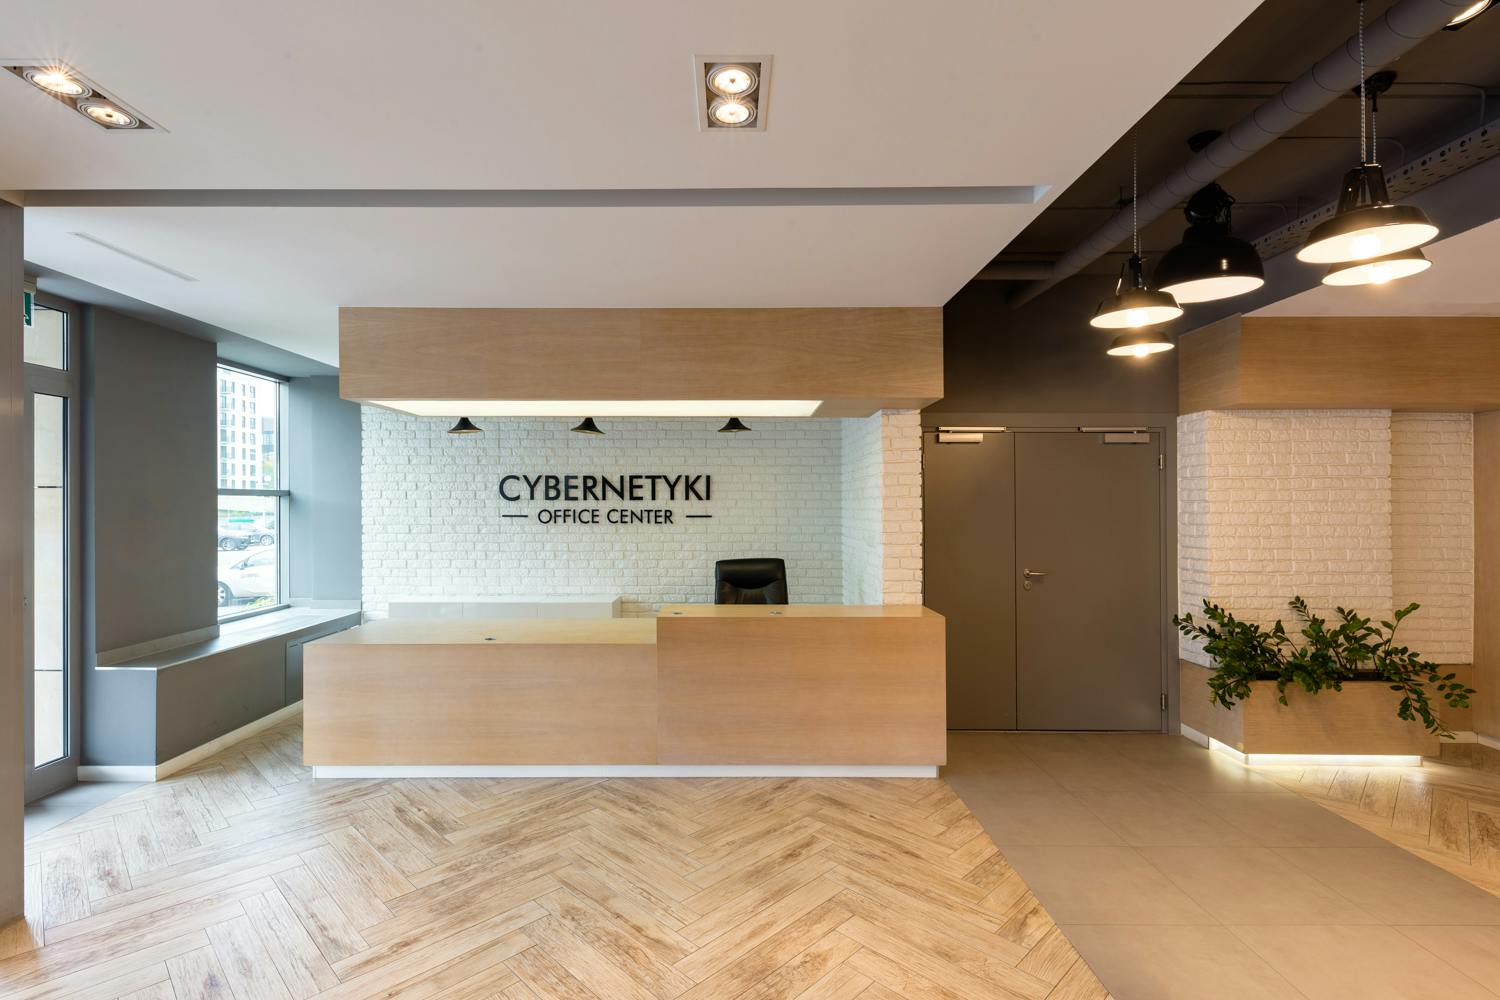 Offices for rent in Offices Cybernetyki Office Center #1